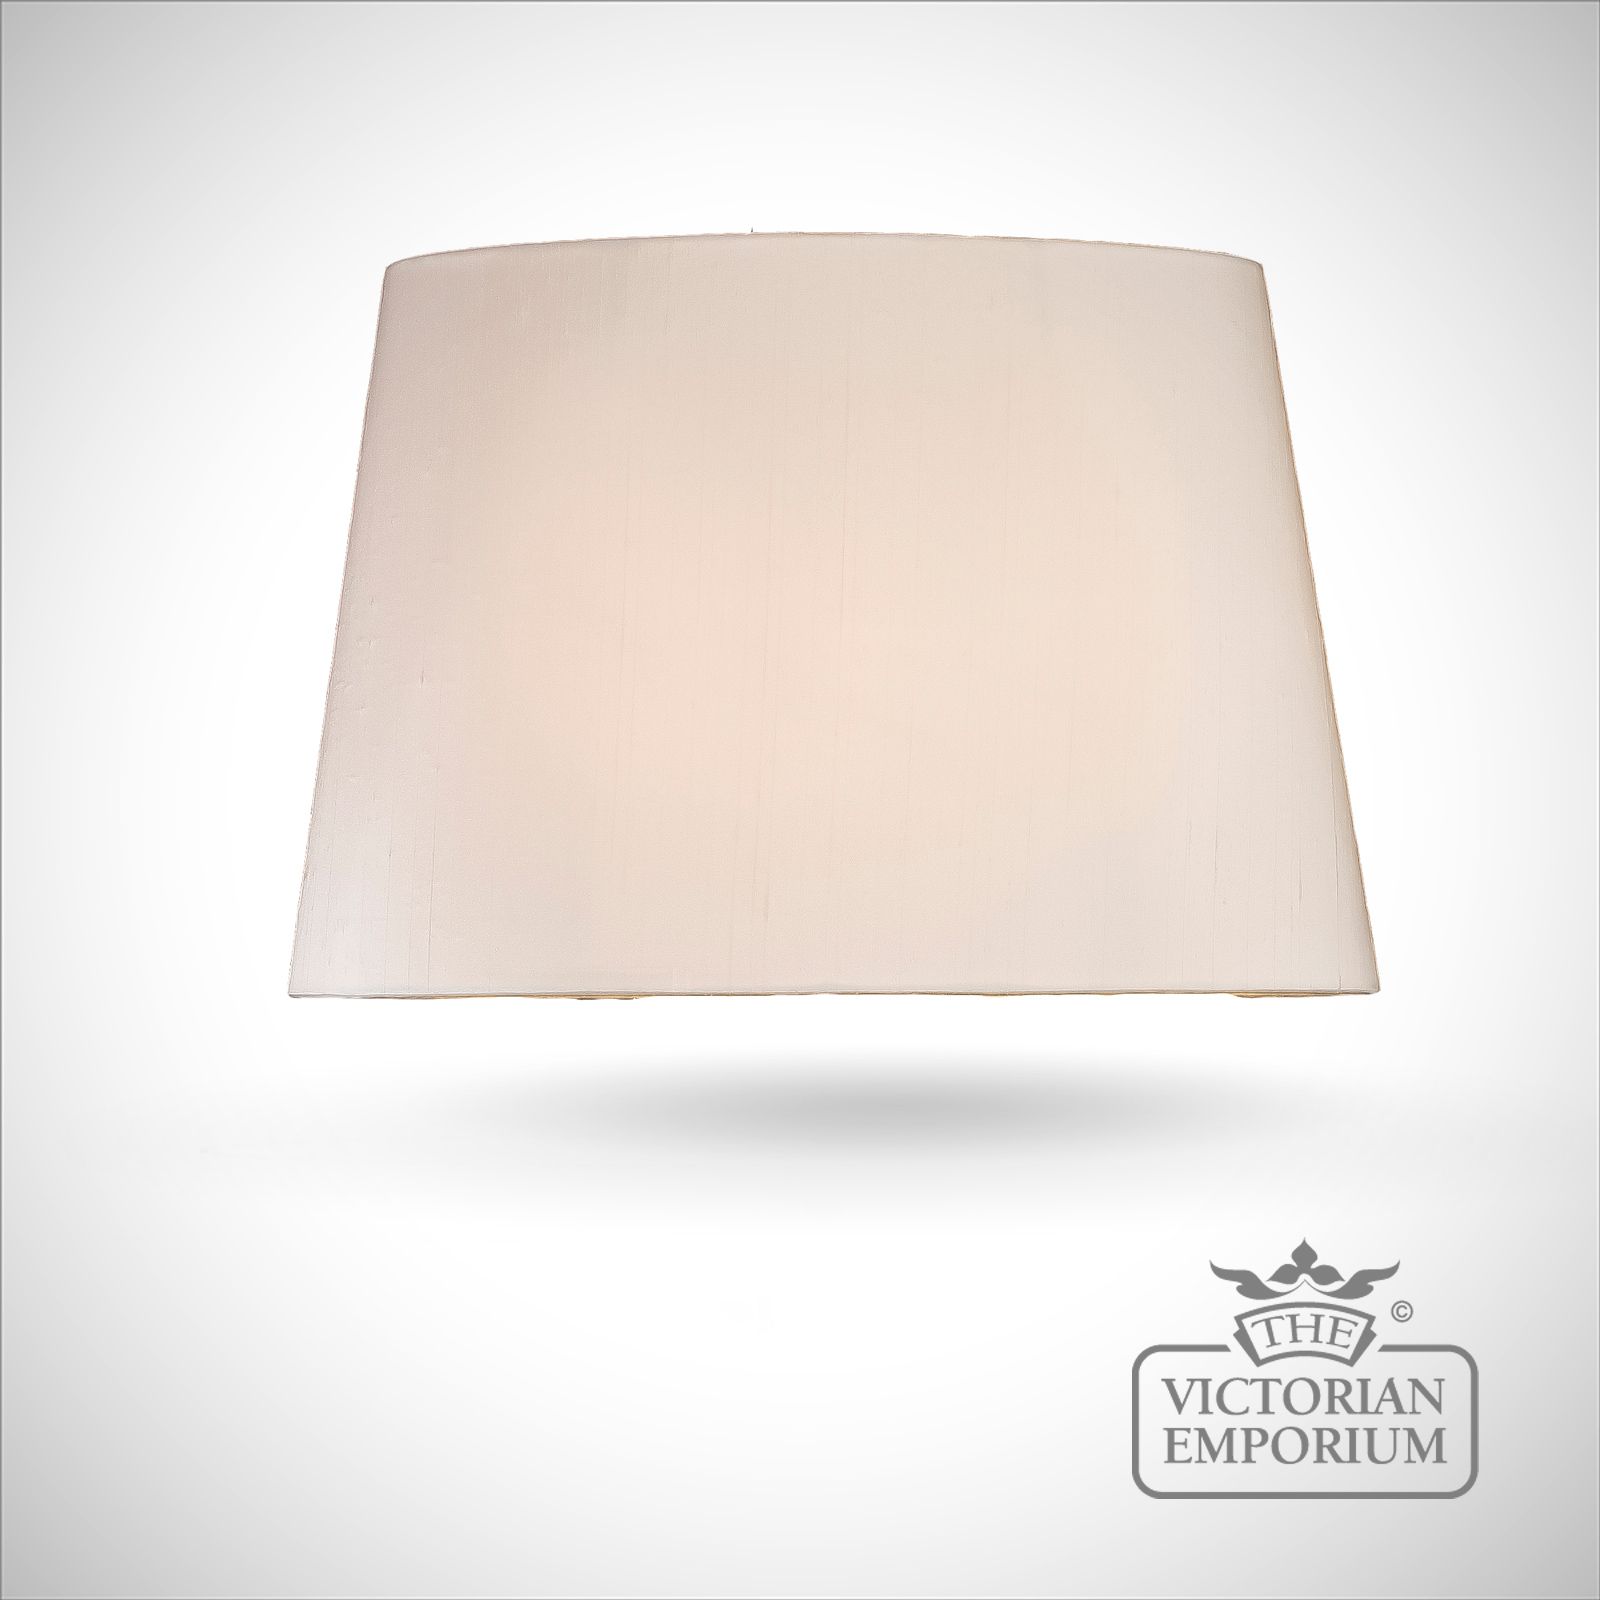 Tapered Oval Lamp Shade in Oyster - 53cm